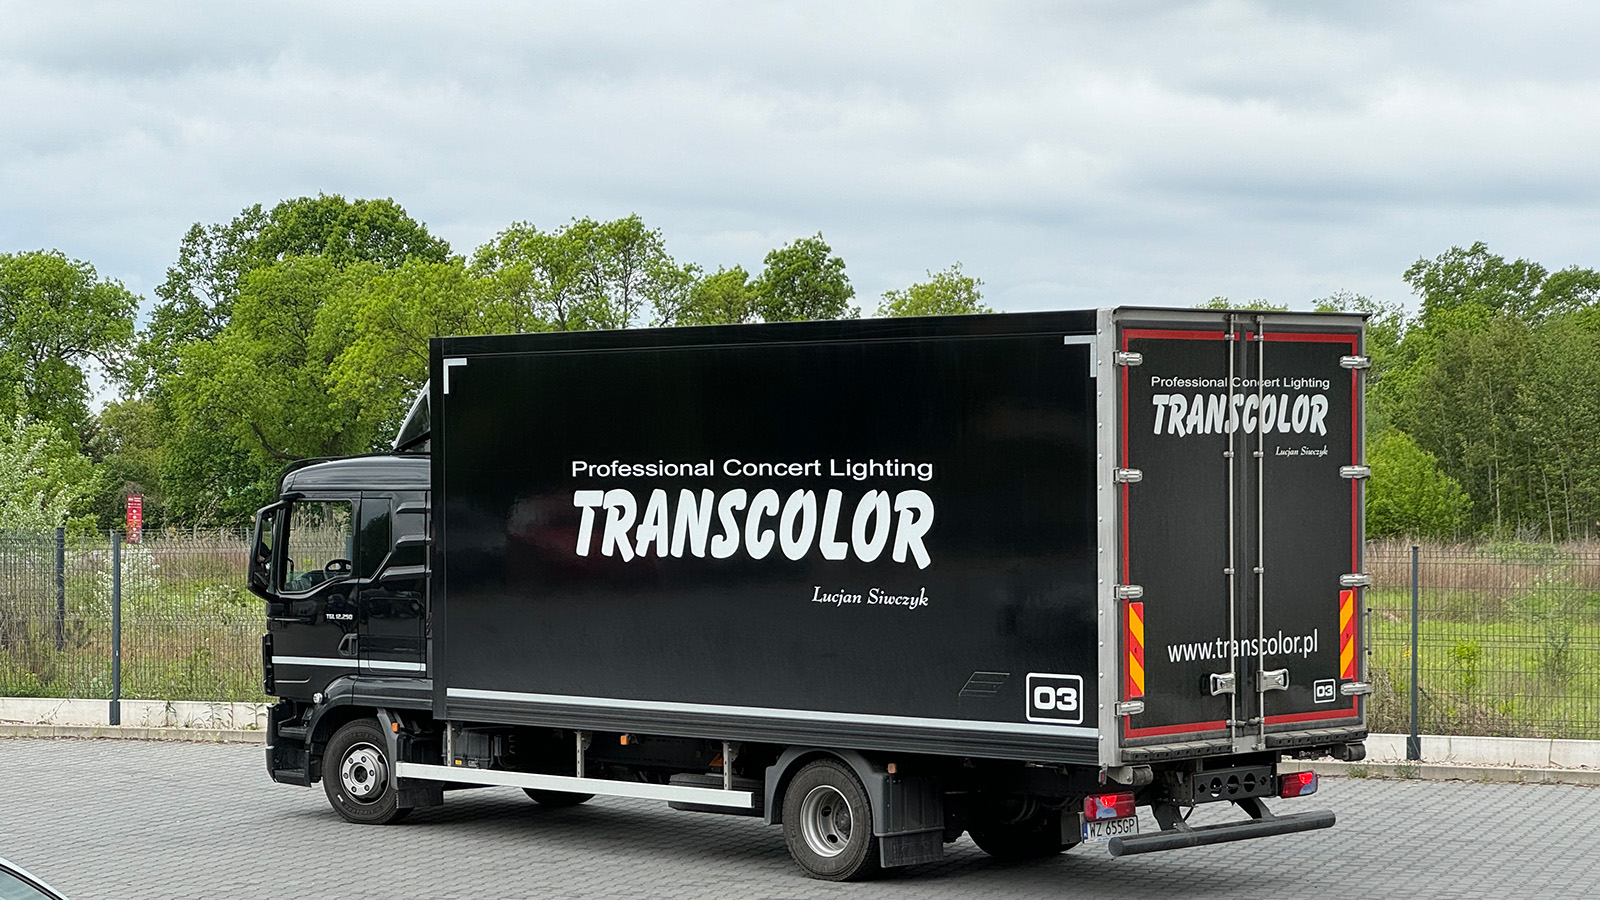 AV LIGHT delivers the first GLP JDC2 fixtures to TRANSCOLOR, a leading lighting company in Poland